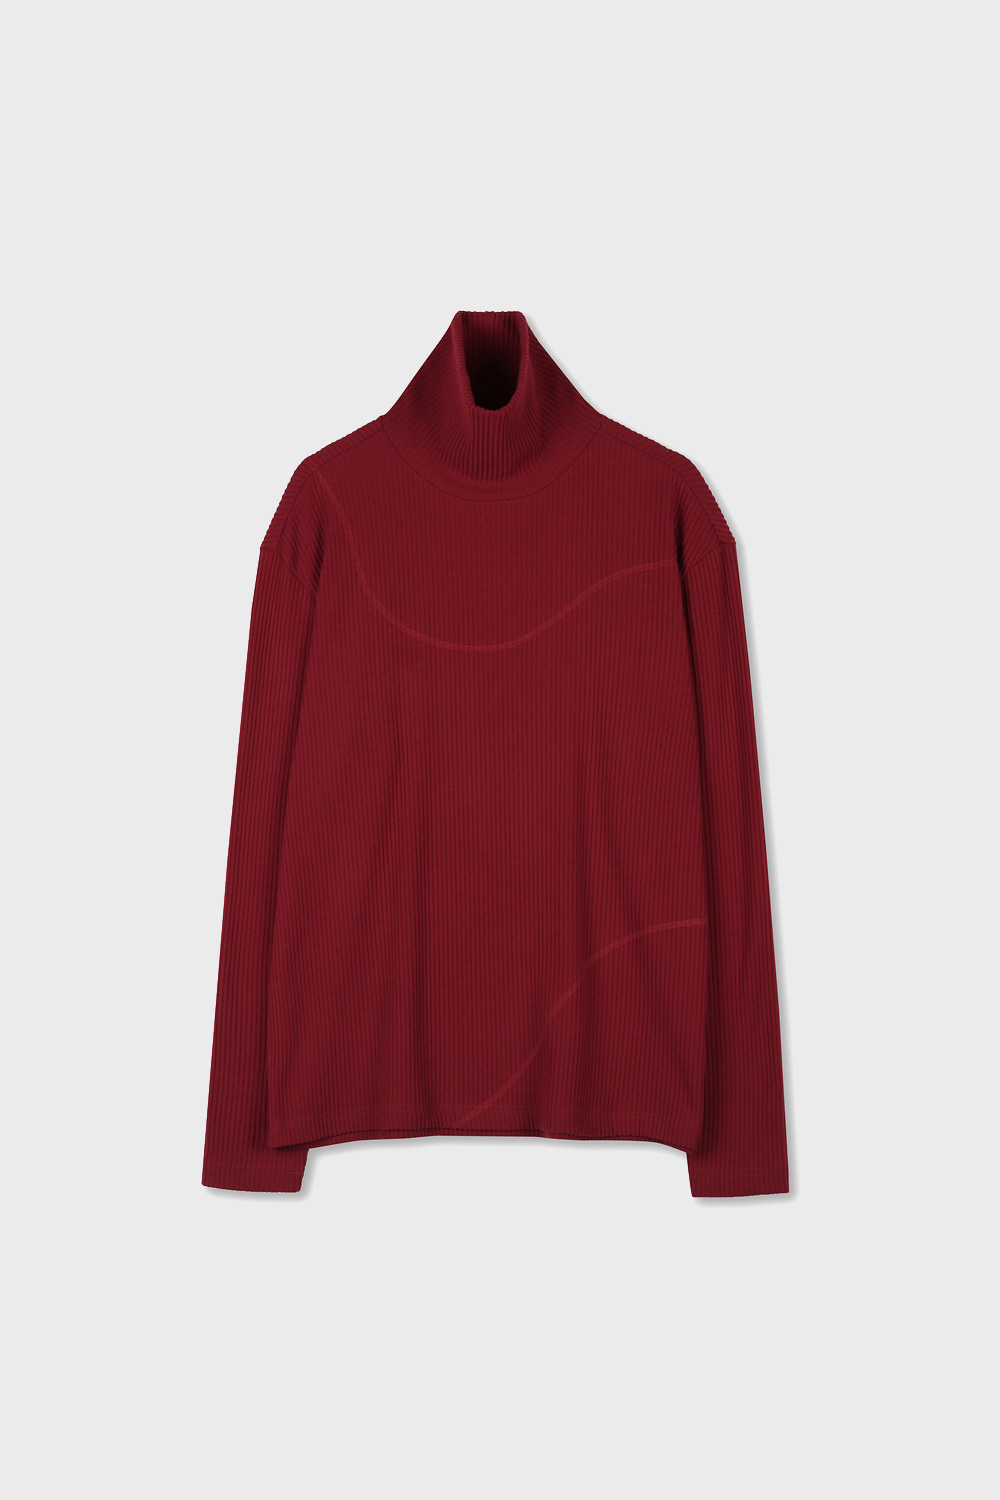 TURTLE NECK T-SHIRT (RED)